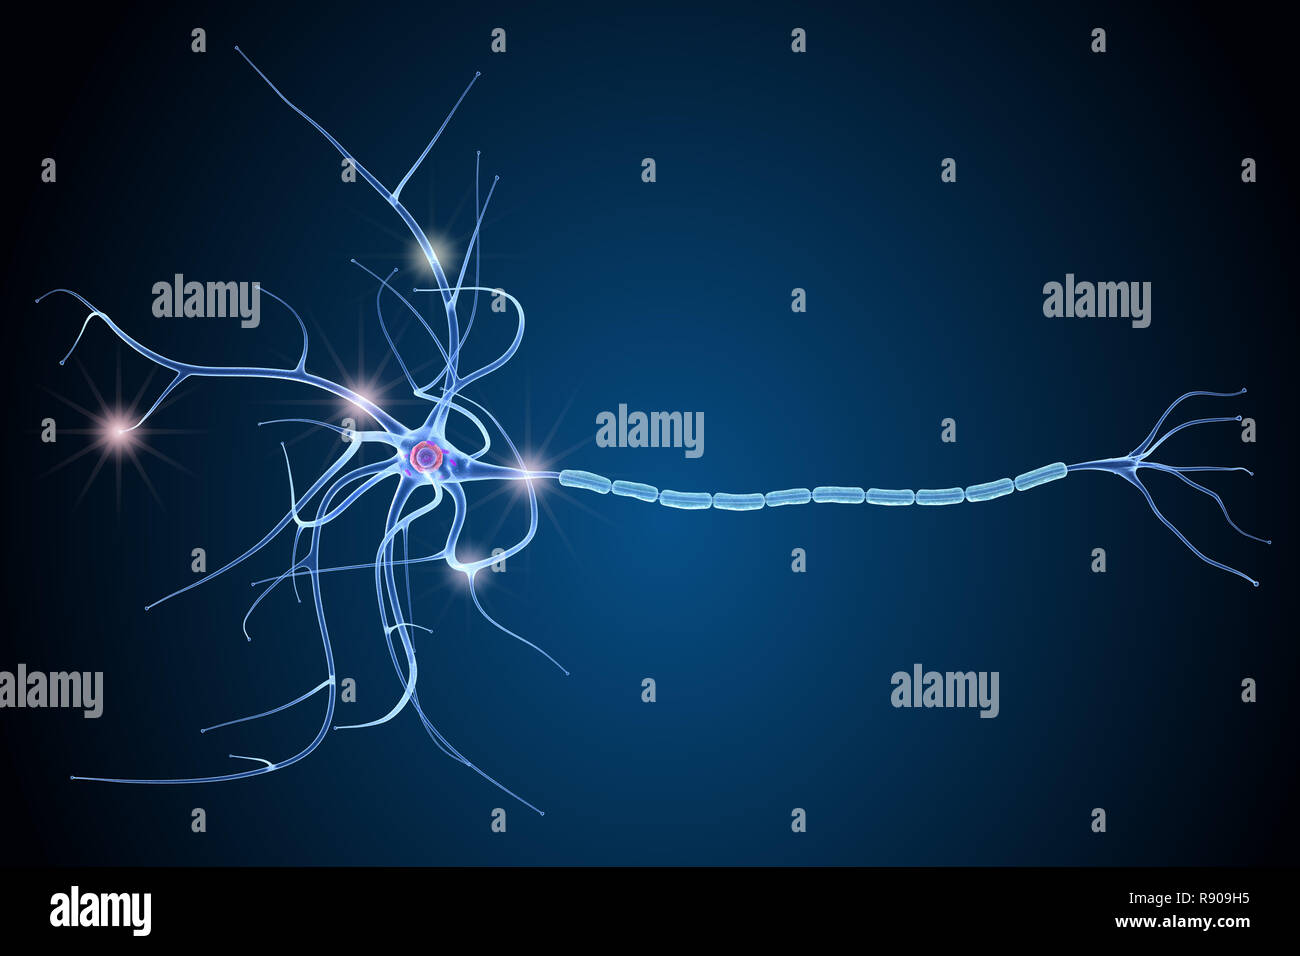 Nerve cell anatomy in details. 3D illustration Stock Photo